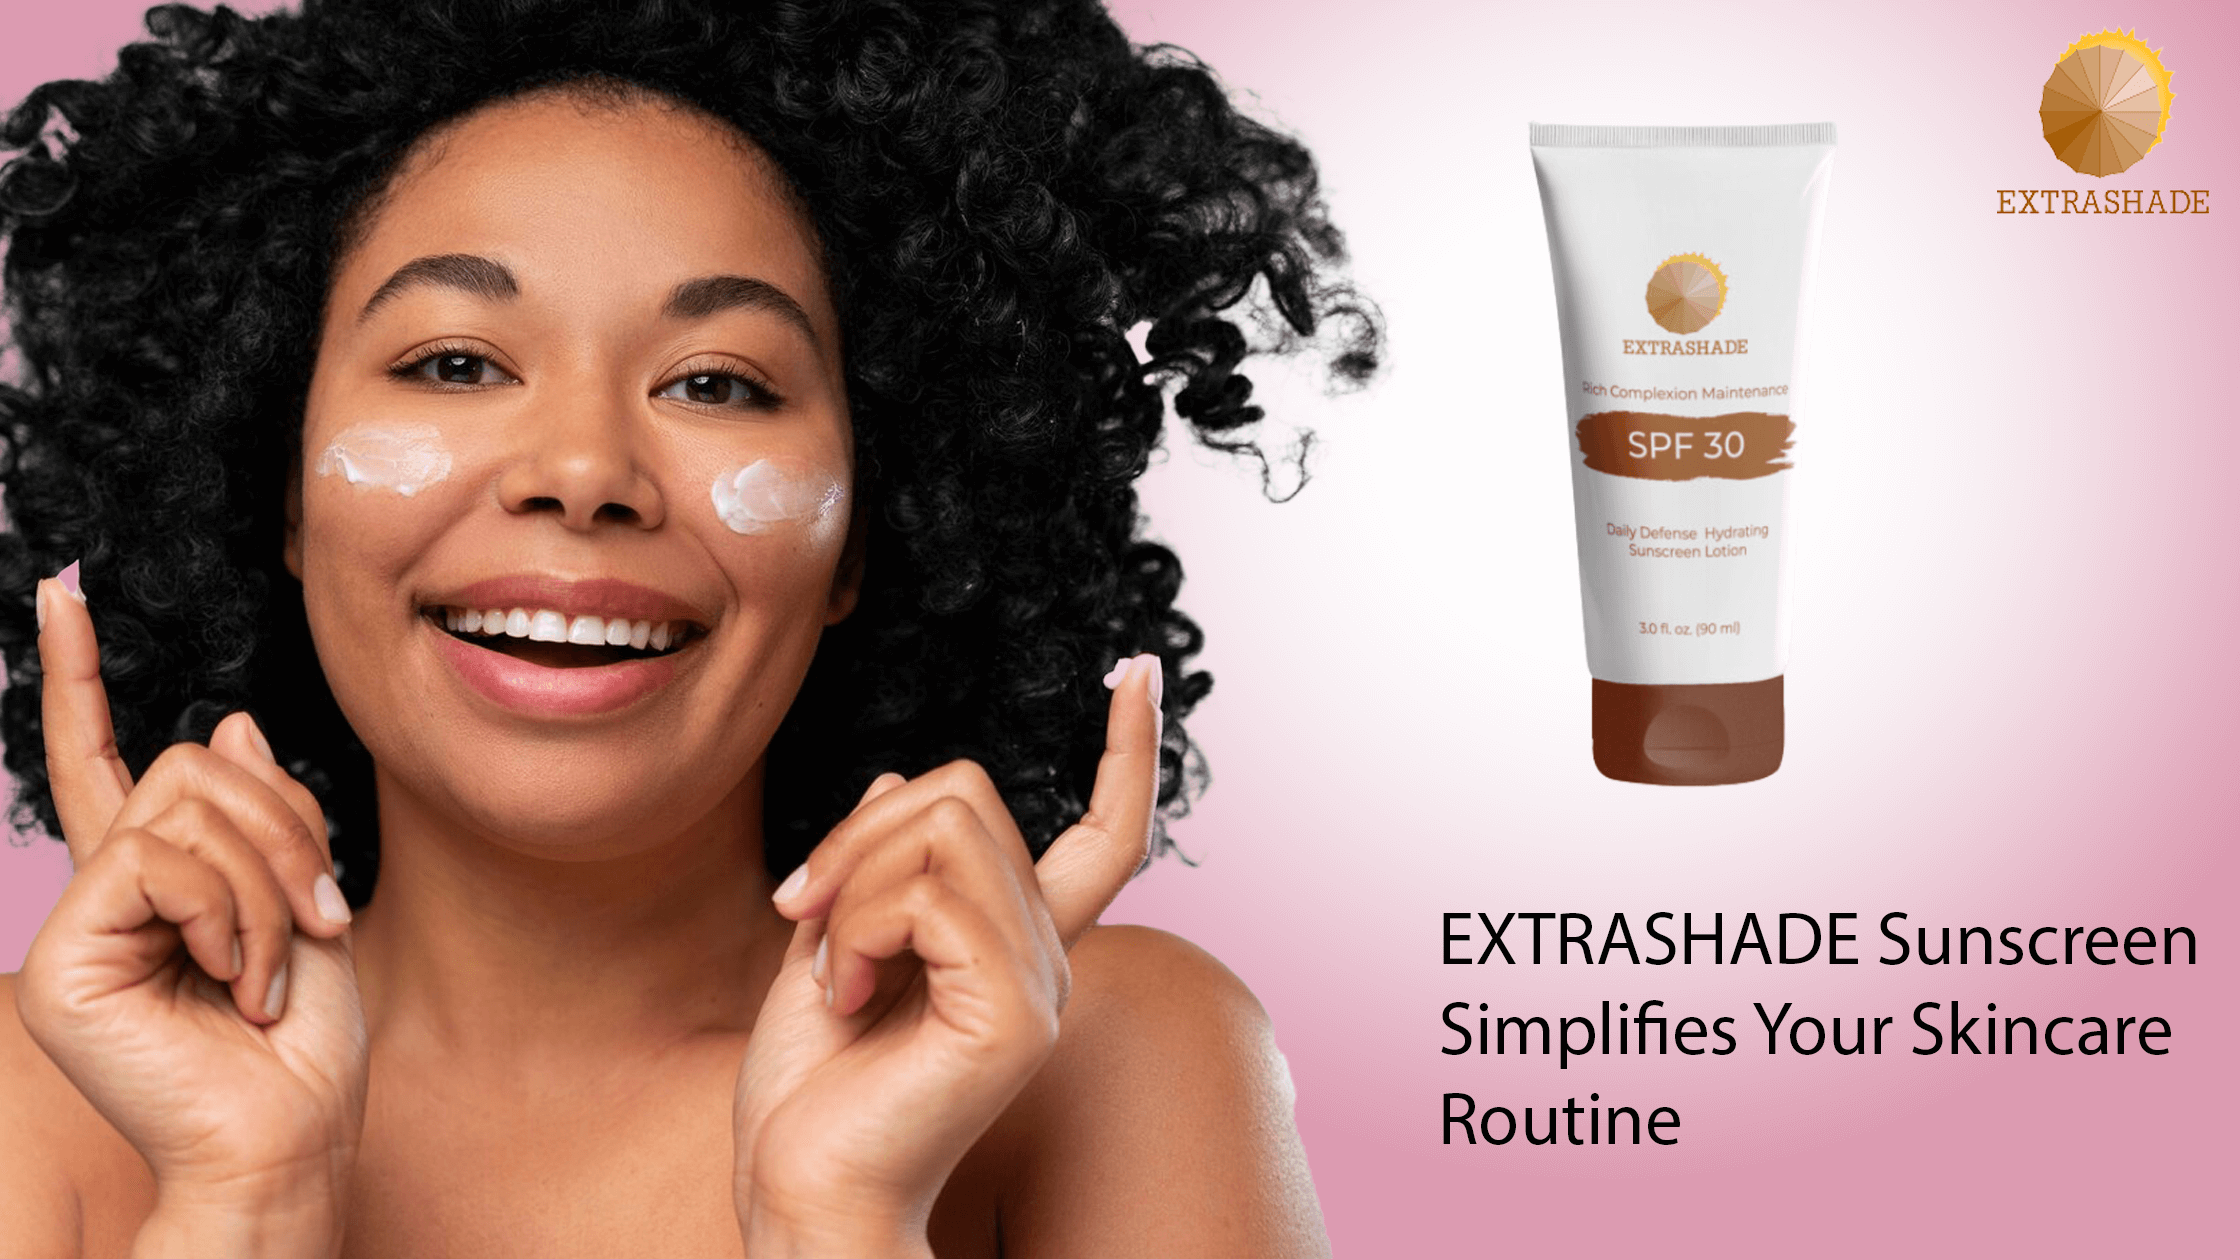 Effortless Radiance EXTRASHADE Sunscreen Simplifies Your Skincare Routine 1